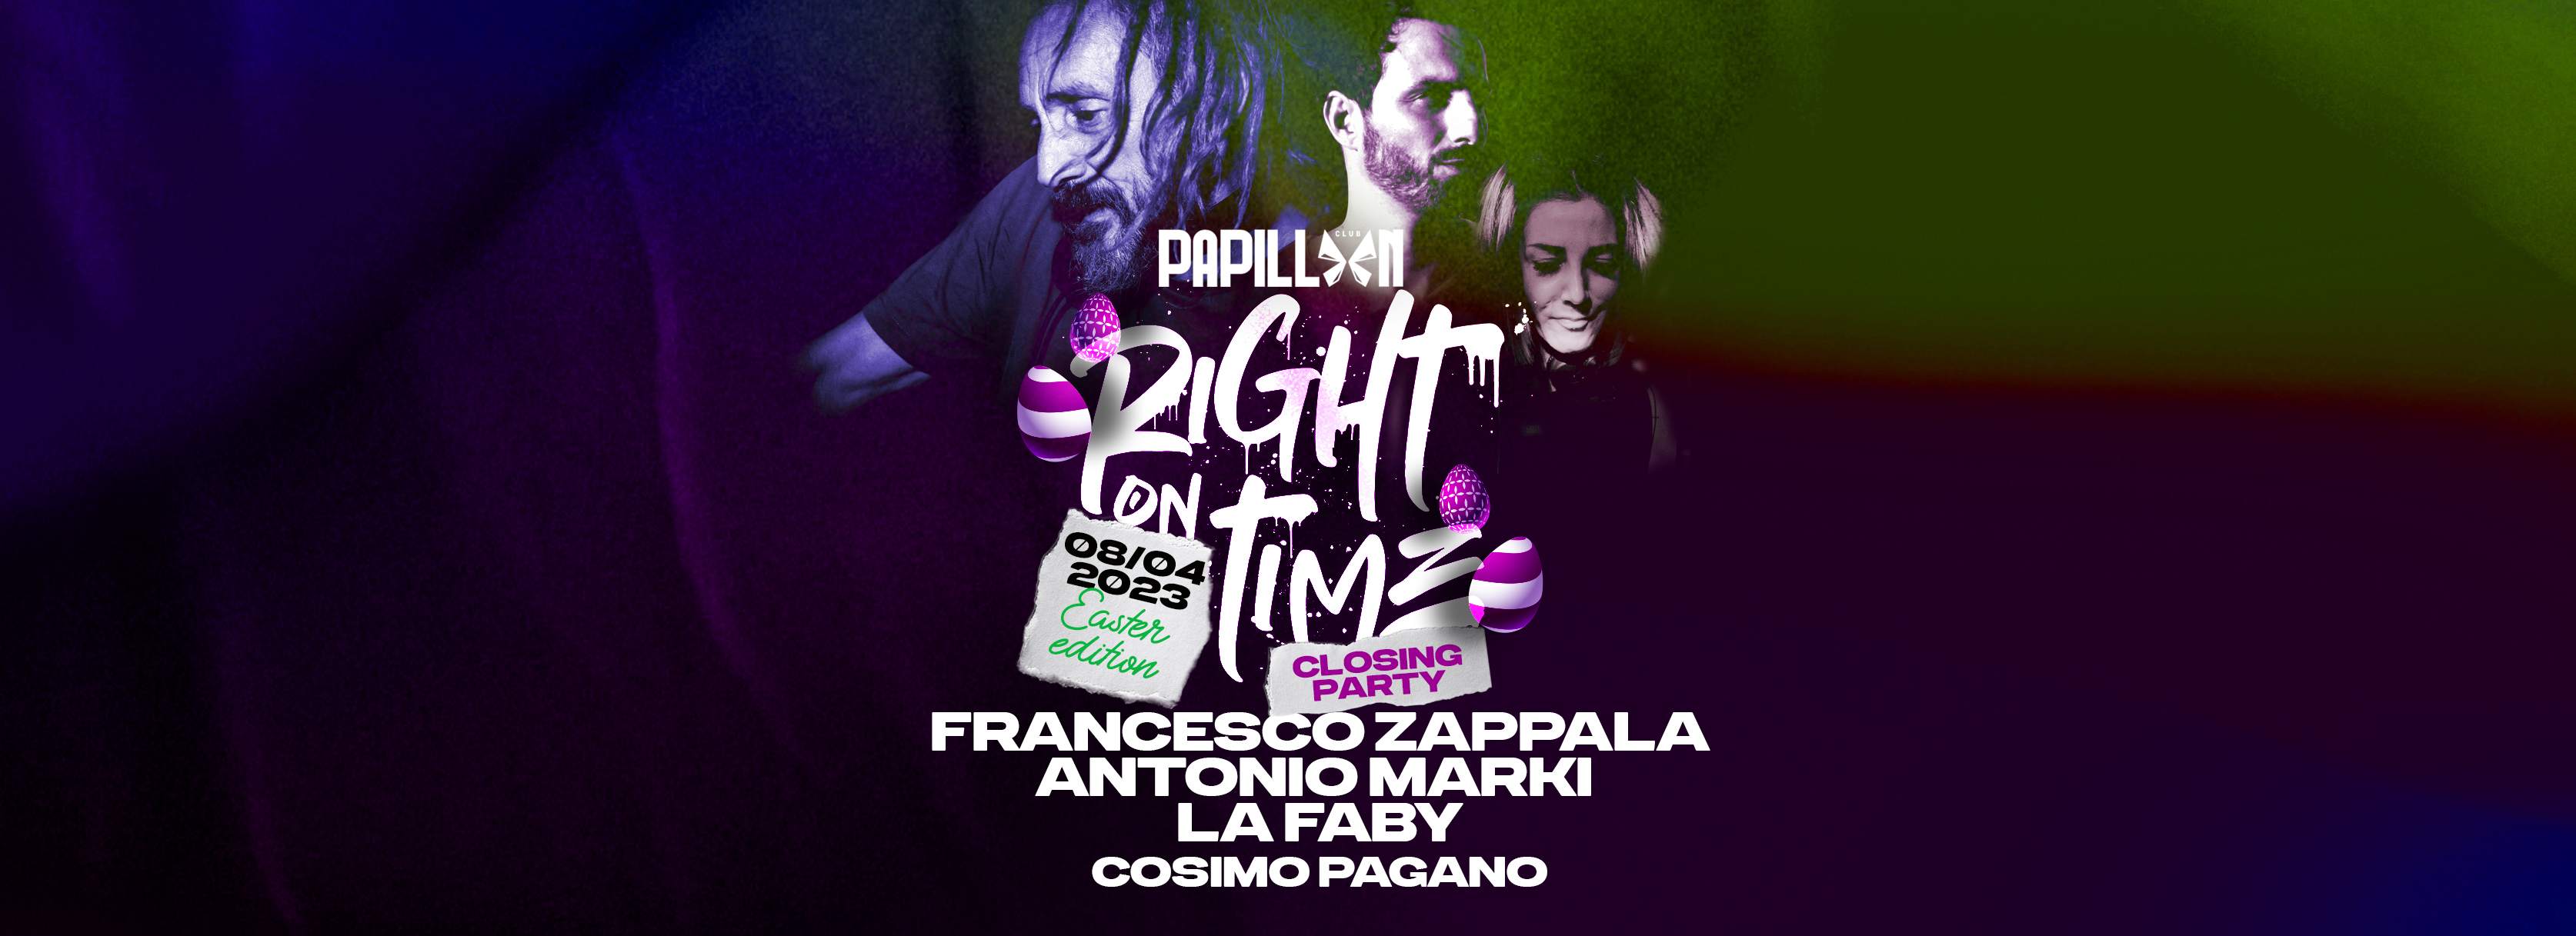 Right On Time Closing - Easter Edition - Página frontal